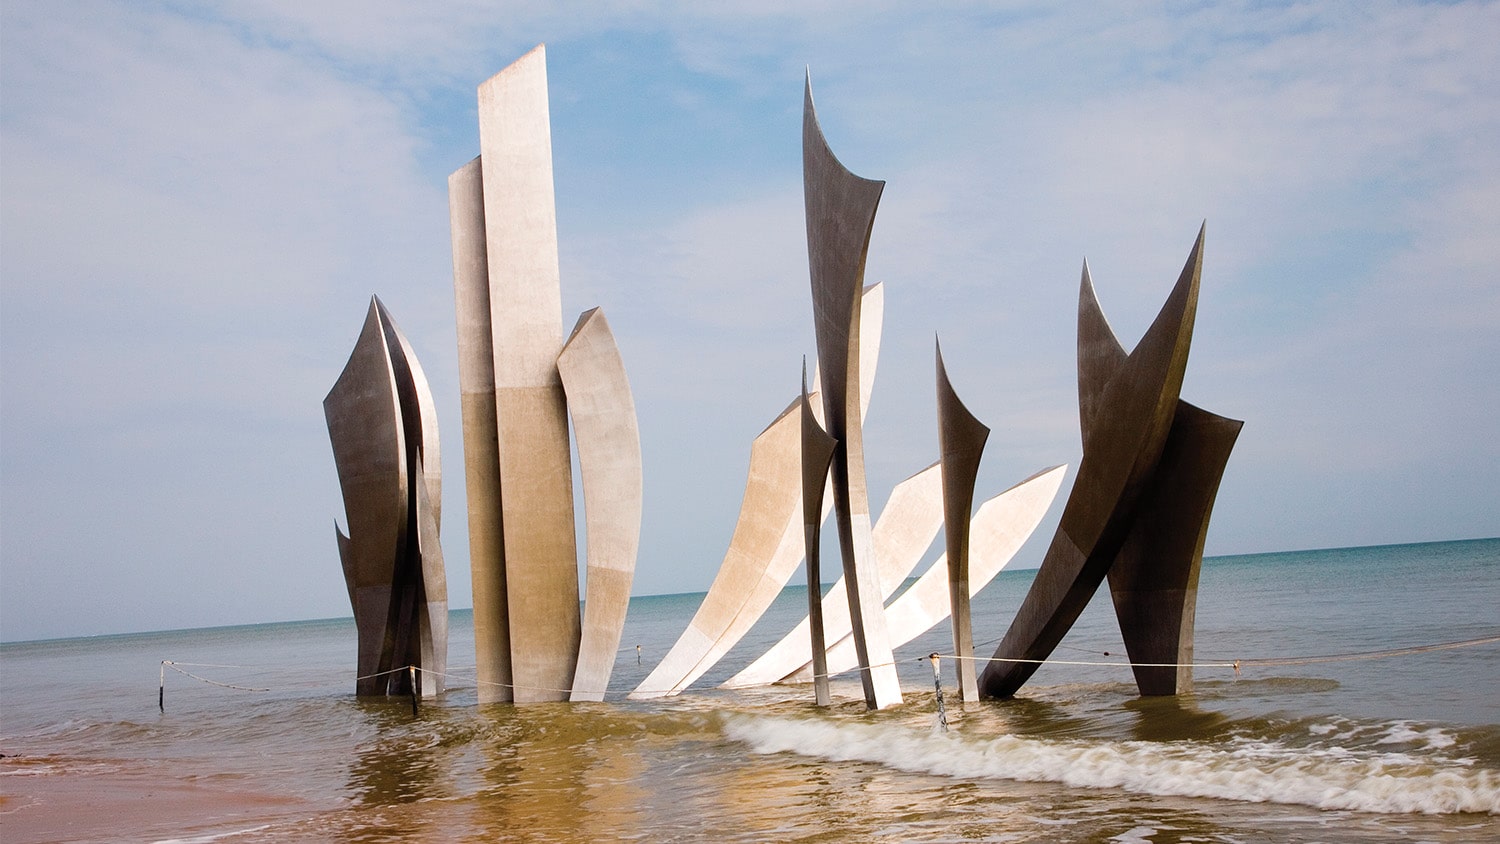 On Omaha Beach’s shore, waves come upon Les Braves, a monument commemorating Allied troops who landed on June 6, 1944. Photograph © Tim Wright / Alamy stock photo